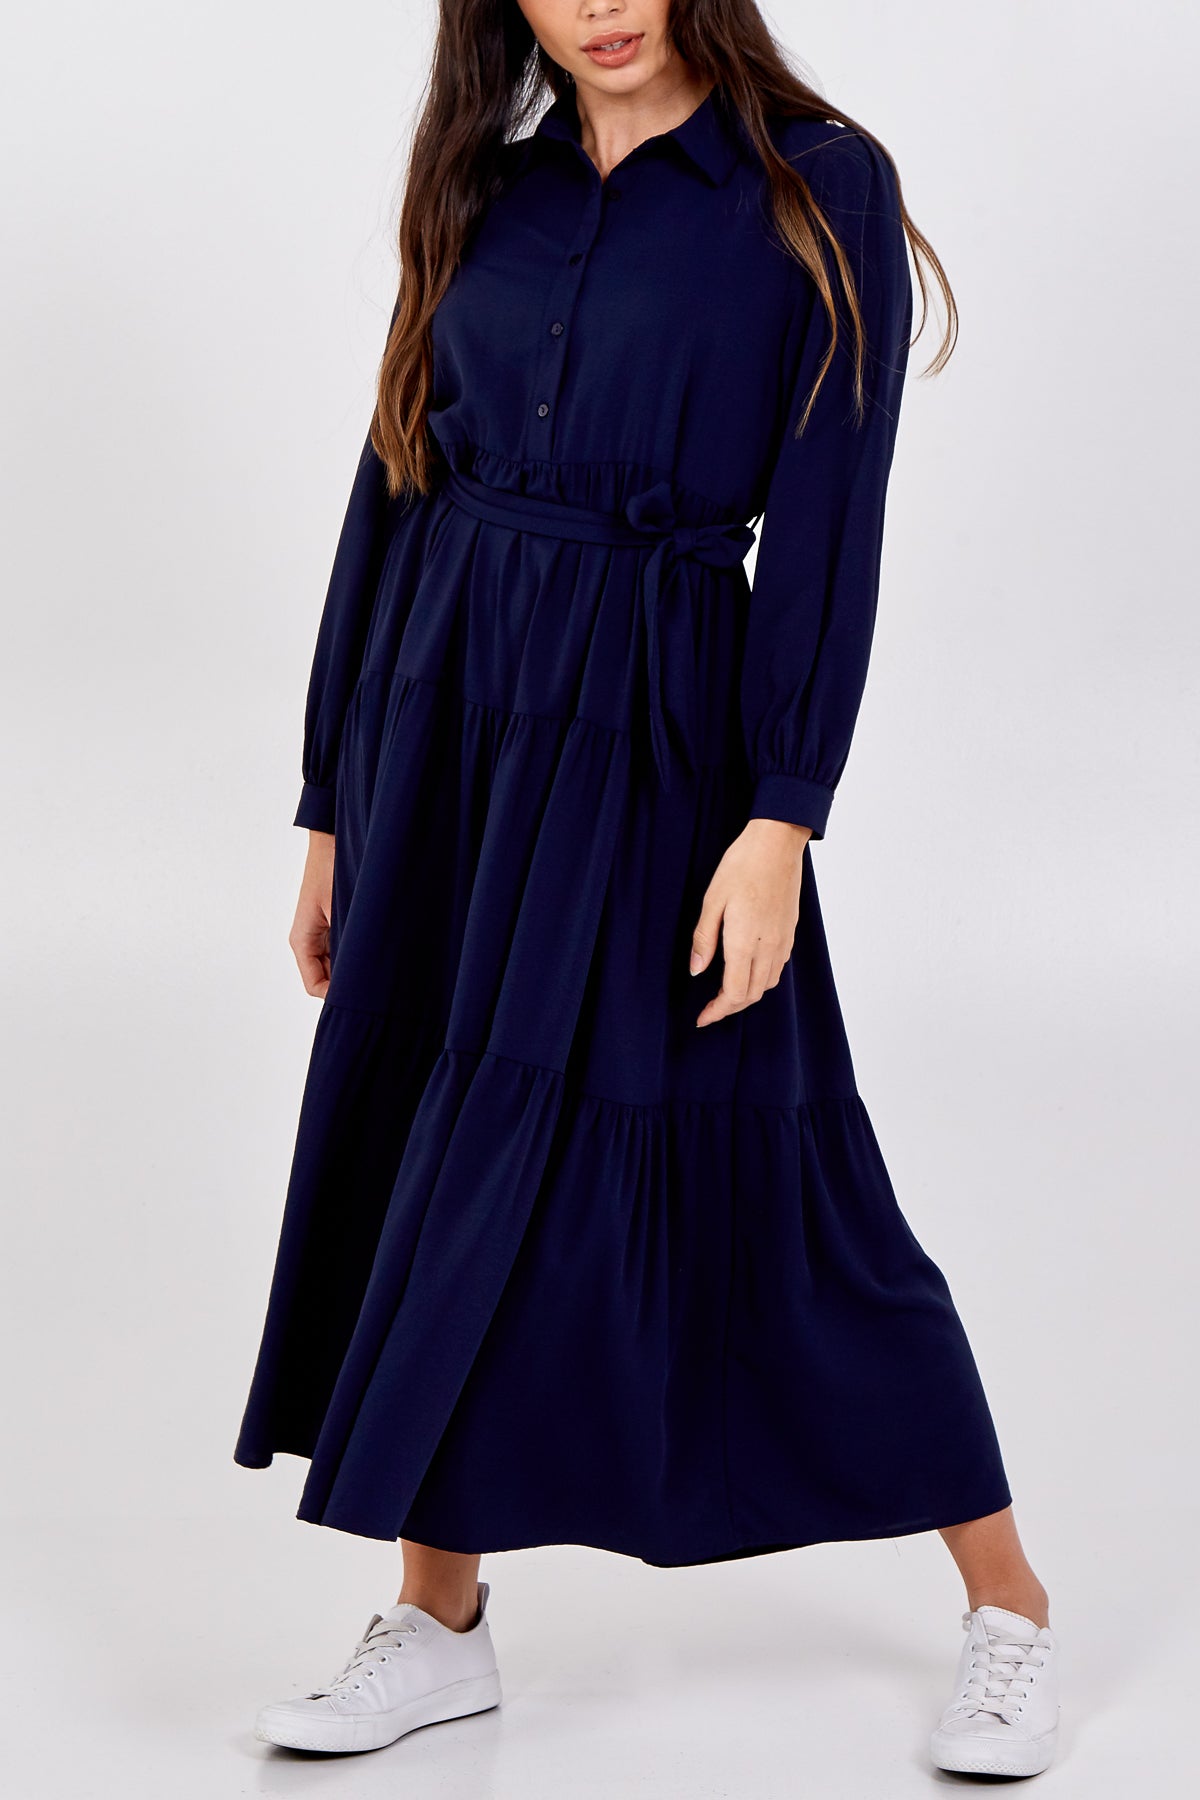 Long Tiered Collar Dress With Belt